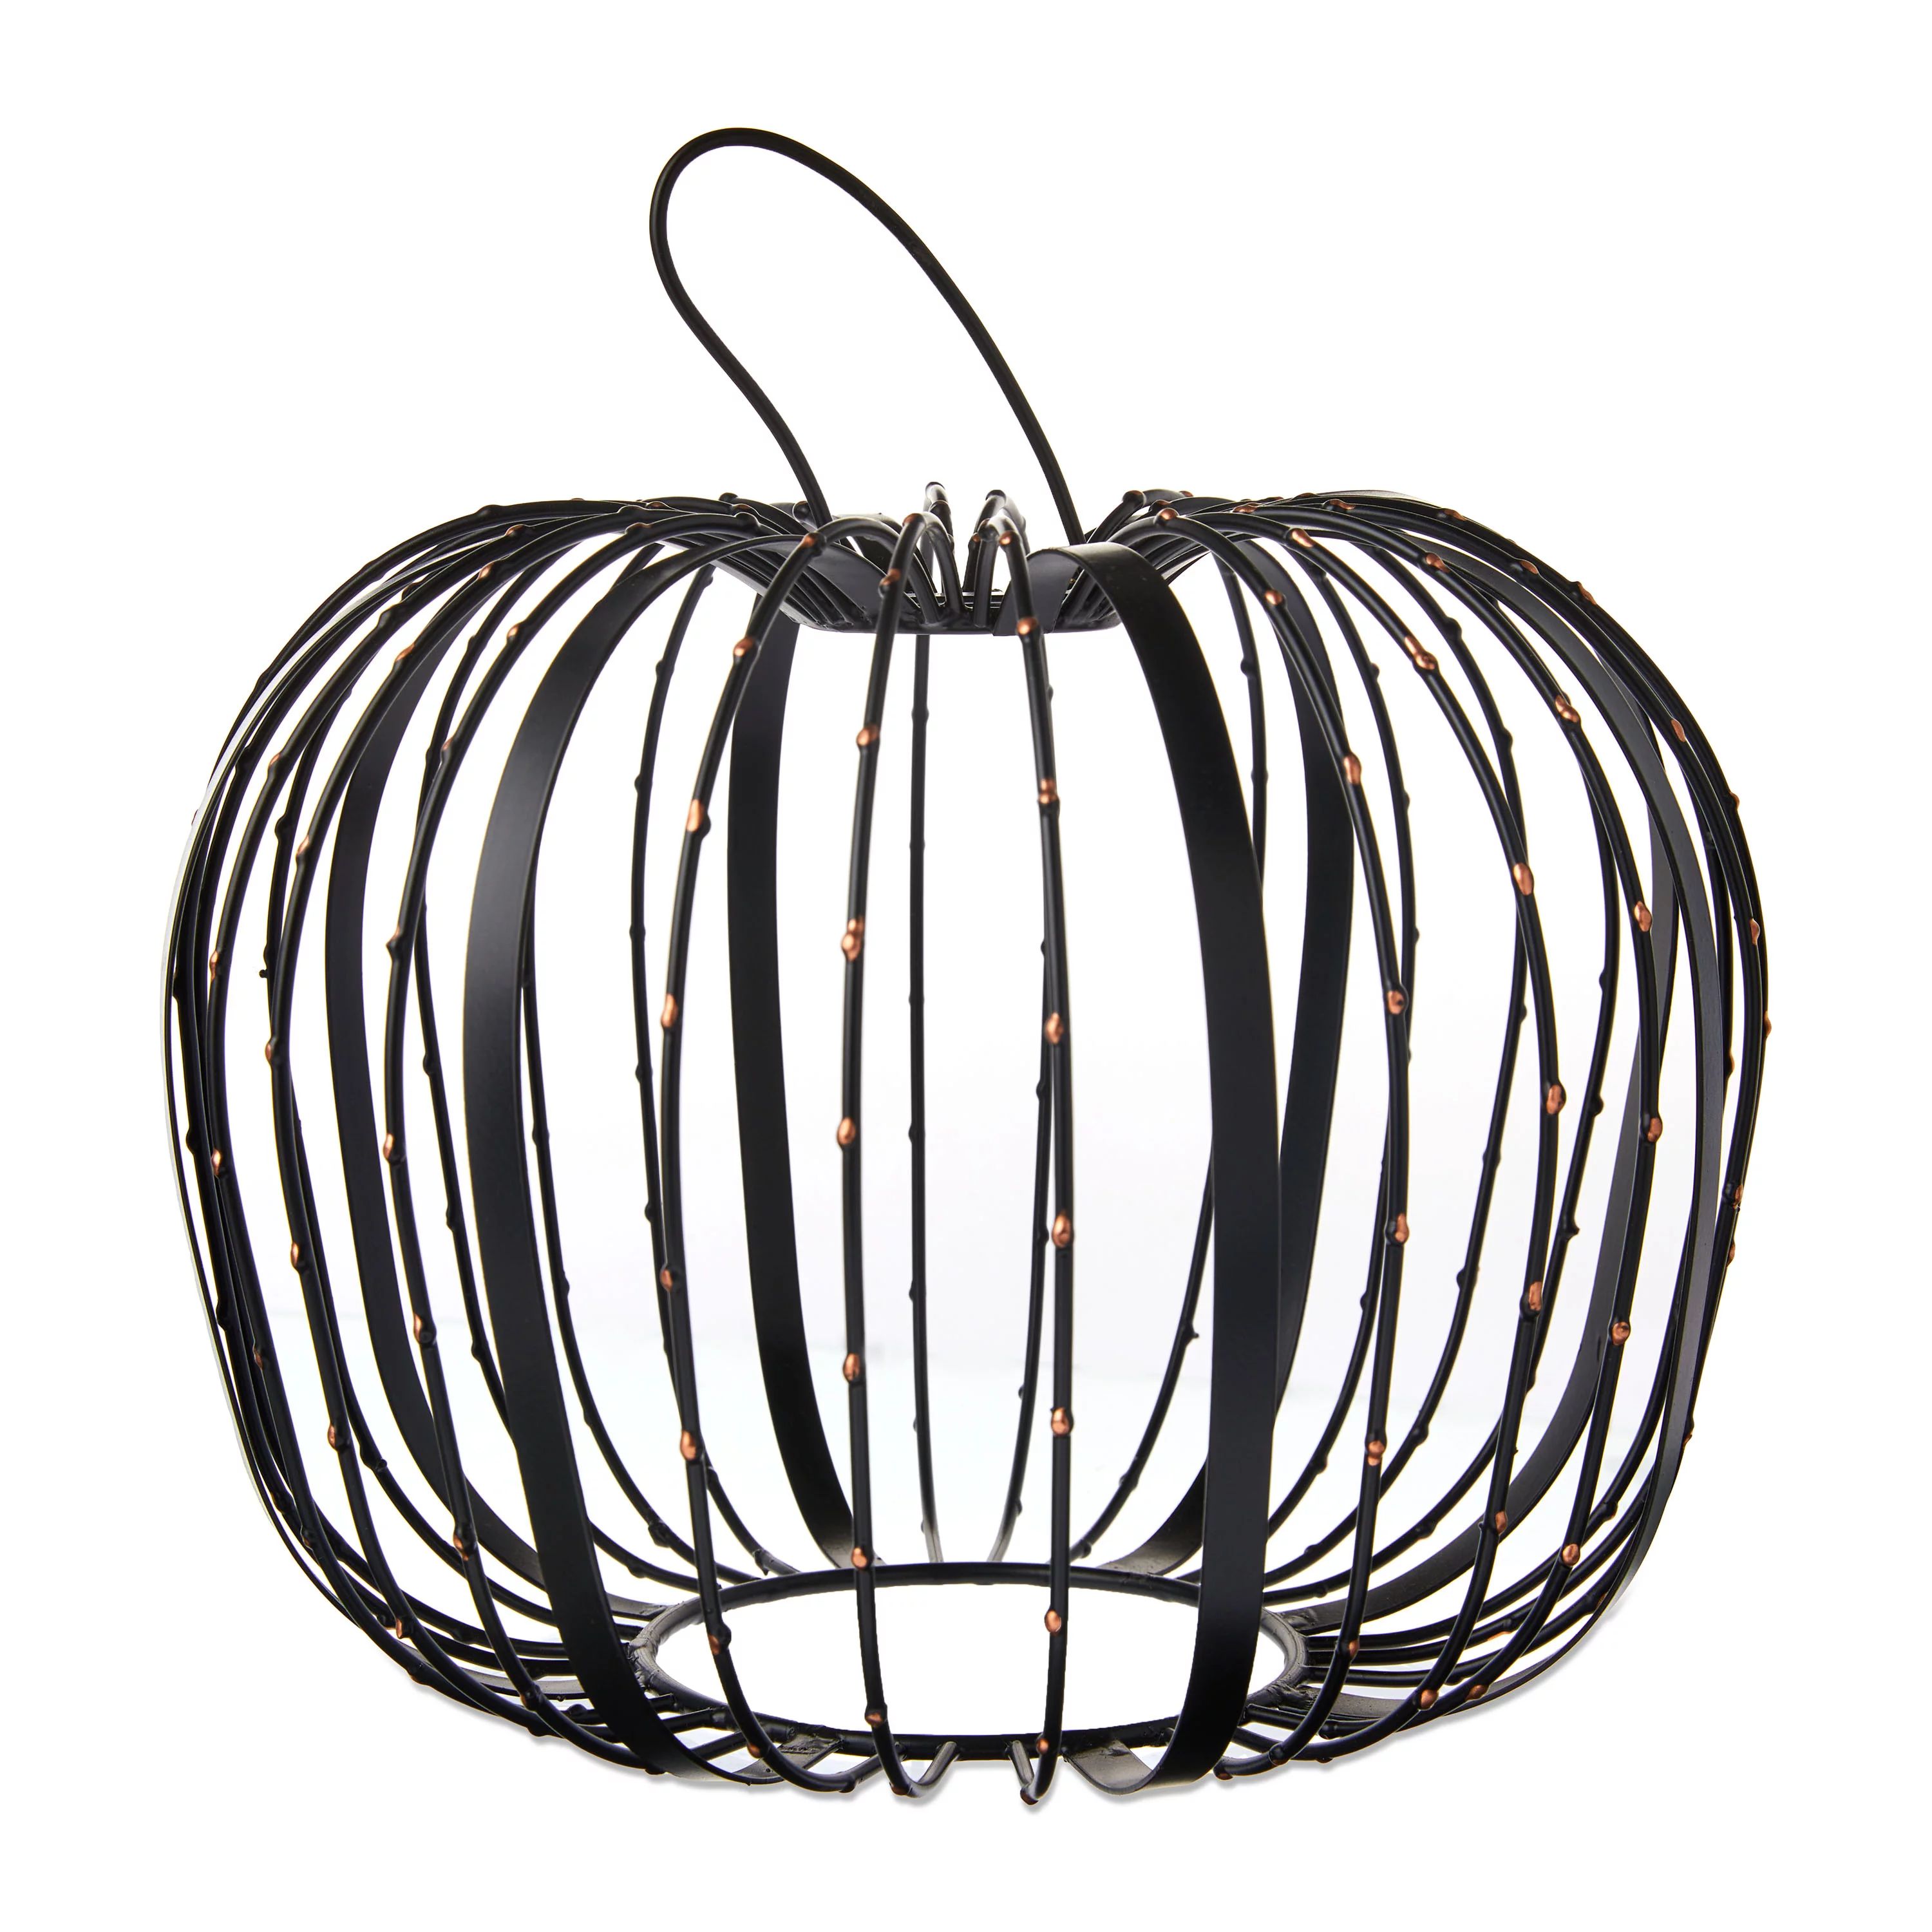 Halloween Black Metal Beaded Wire Pumpkin Decor with Copper Accents, 9.75", by Way To Celebrate | Walmart (US)